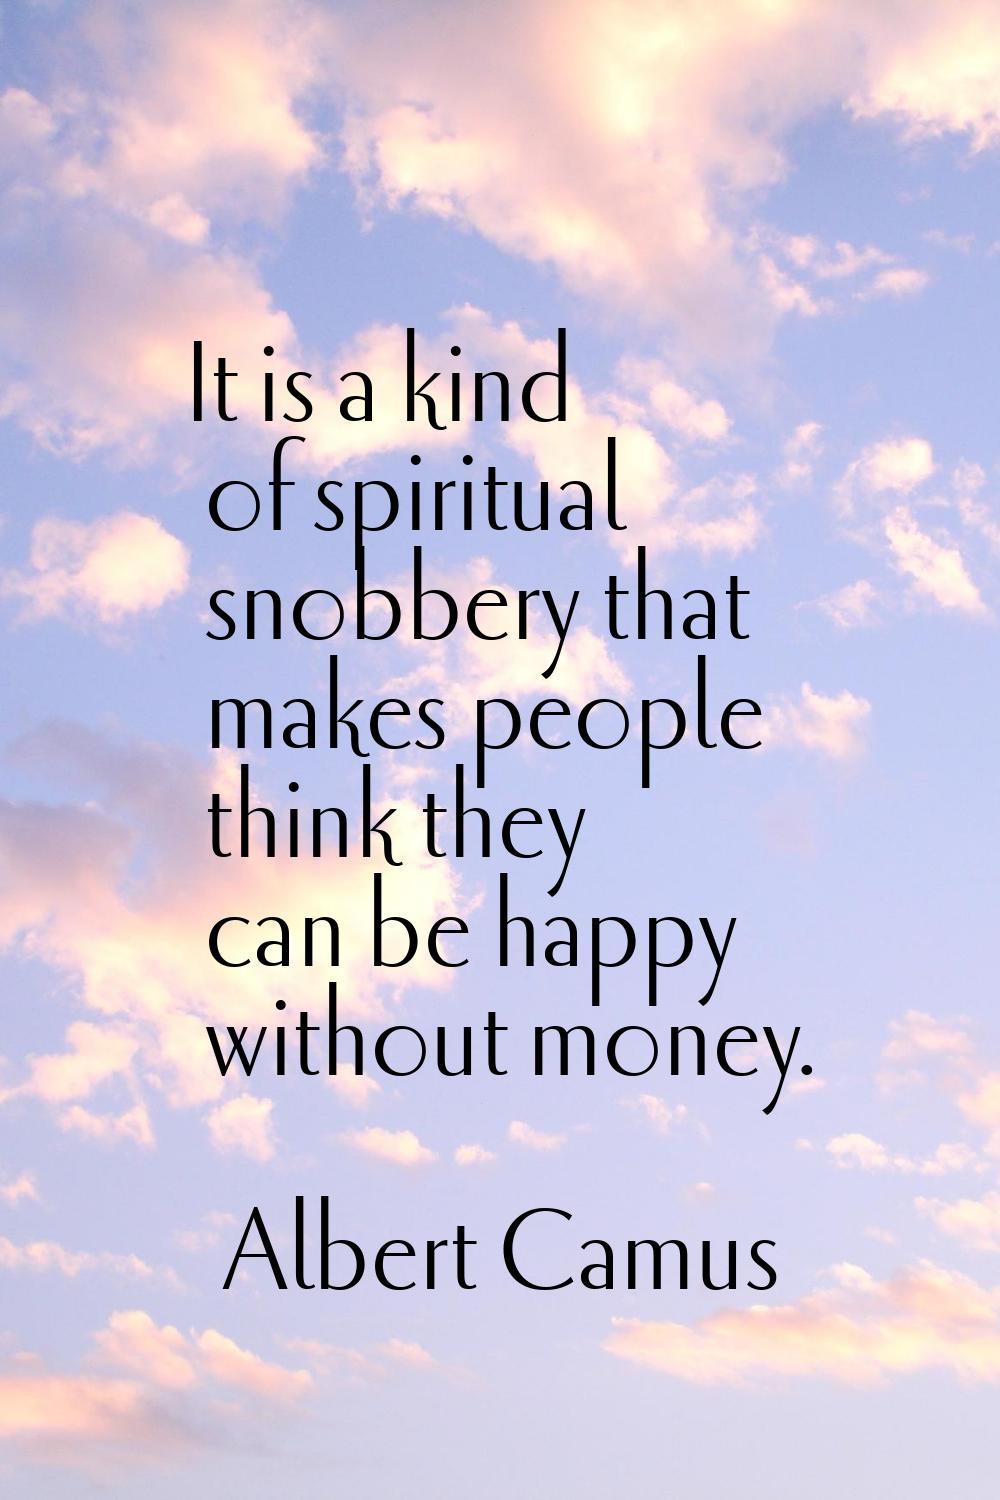 It is a kind of spiritual snobbery that makes people think they can be happy without money.